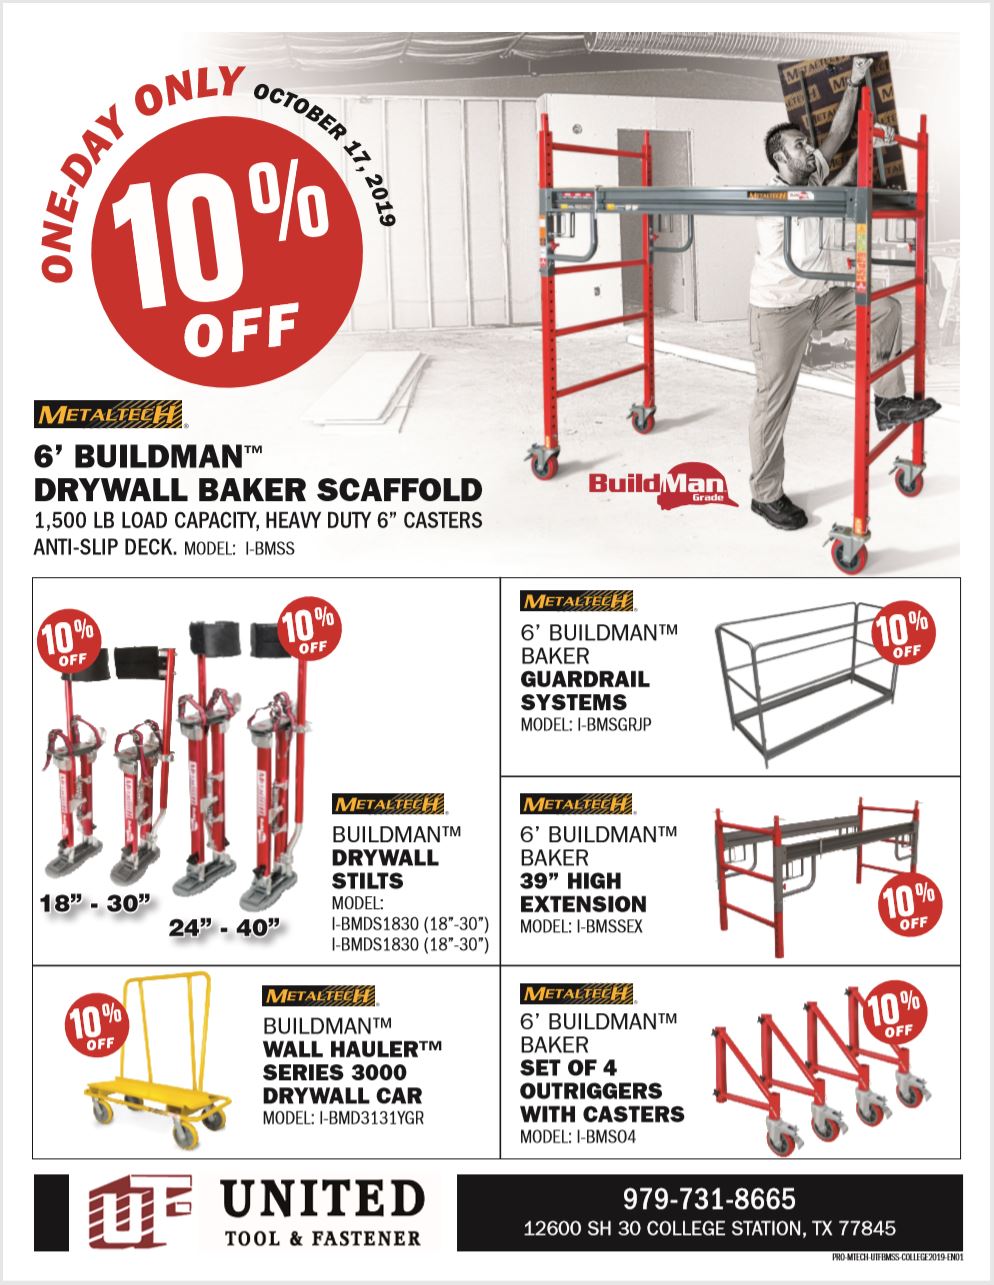 MetalTech College Station One-Day Sale